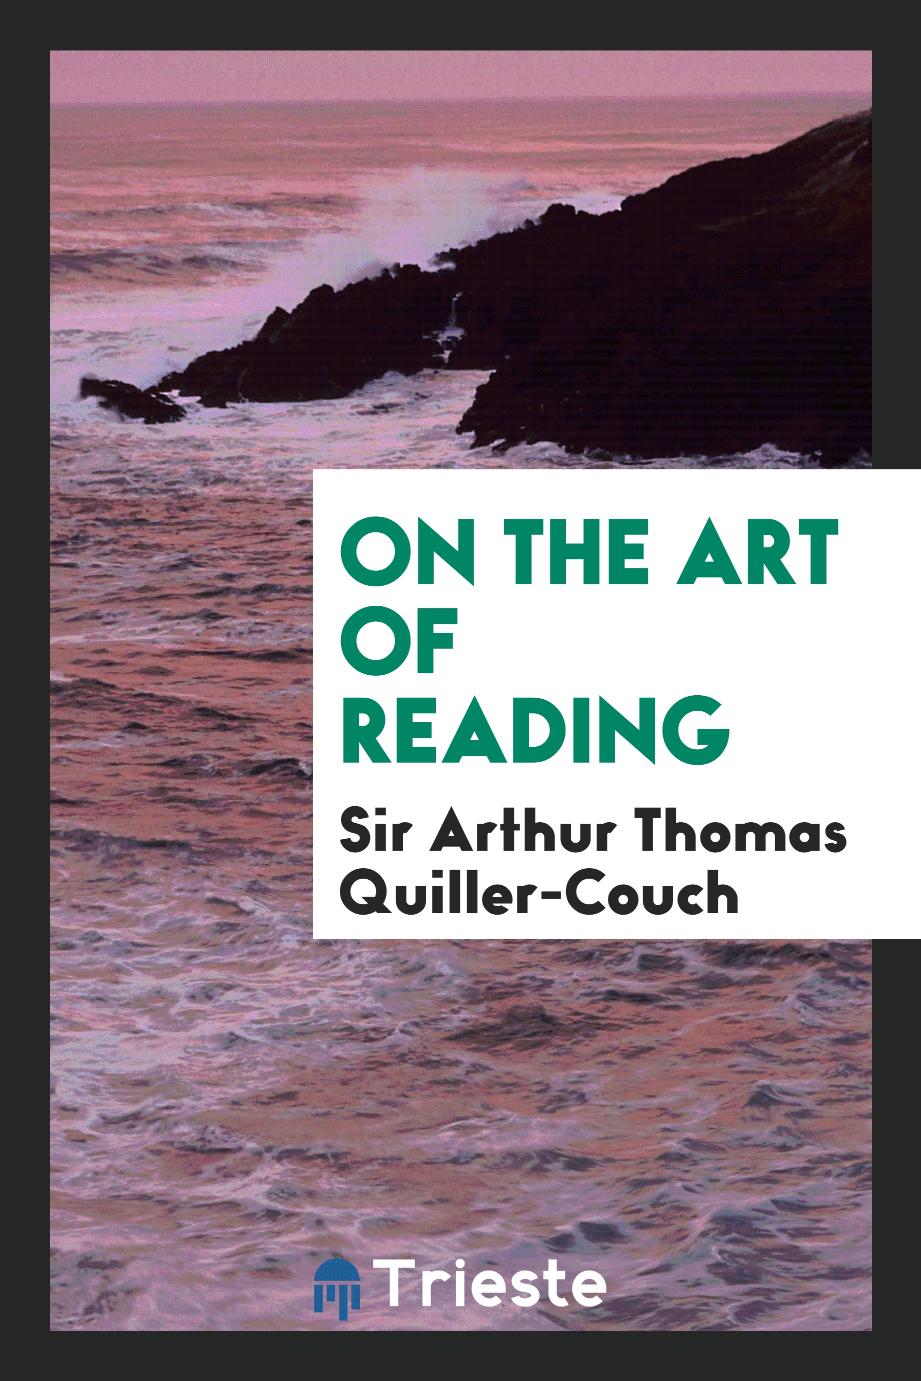 On the art of reading